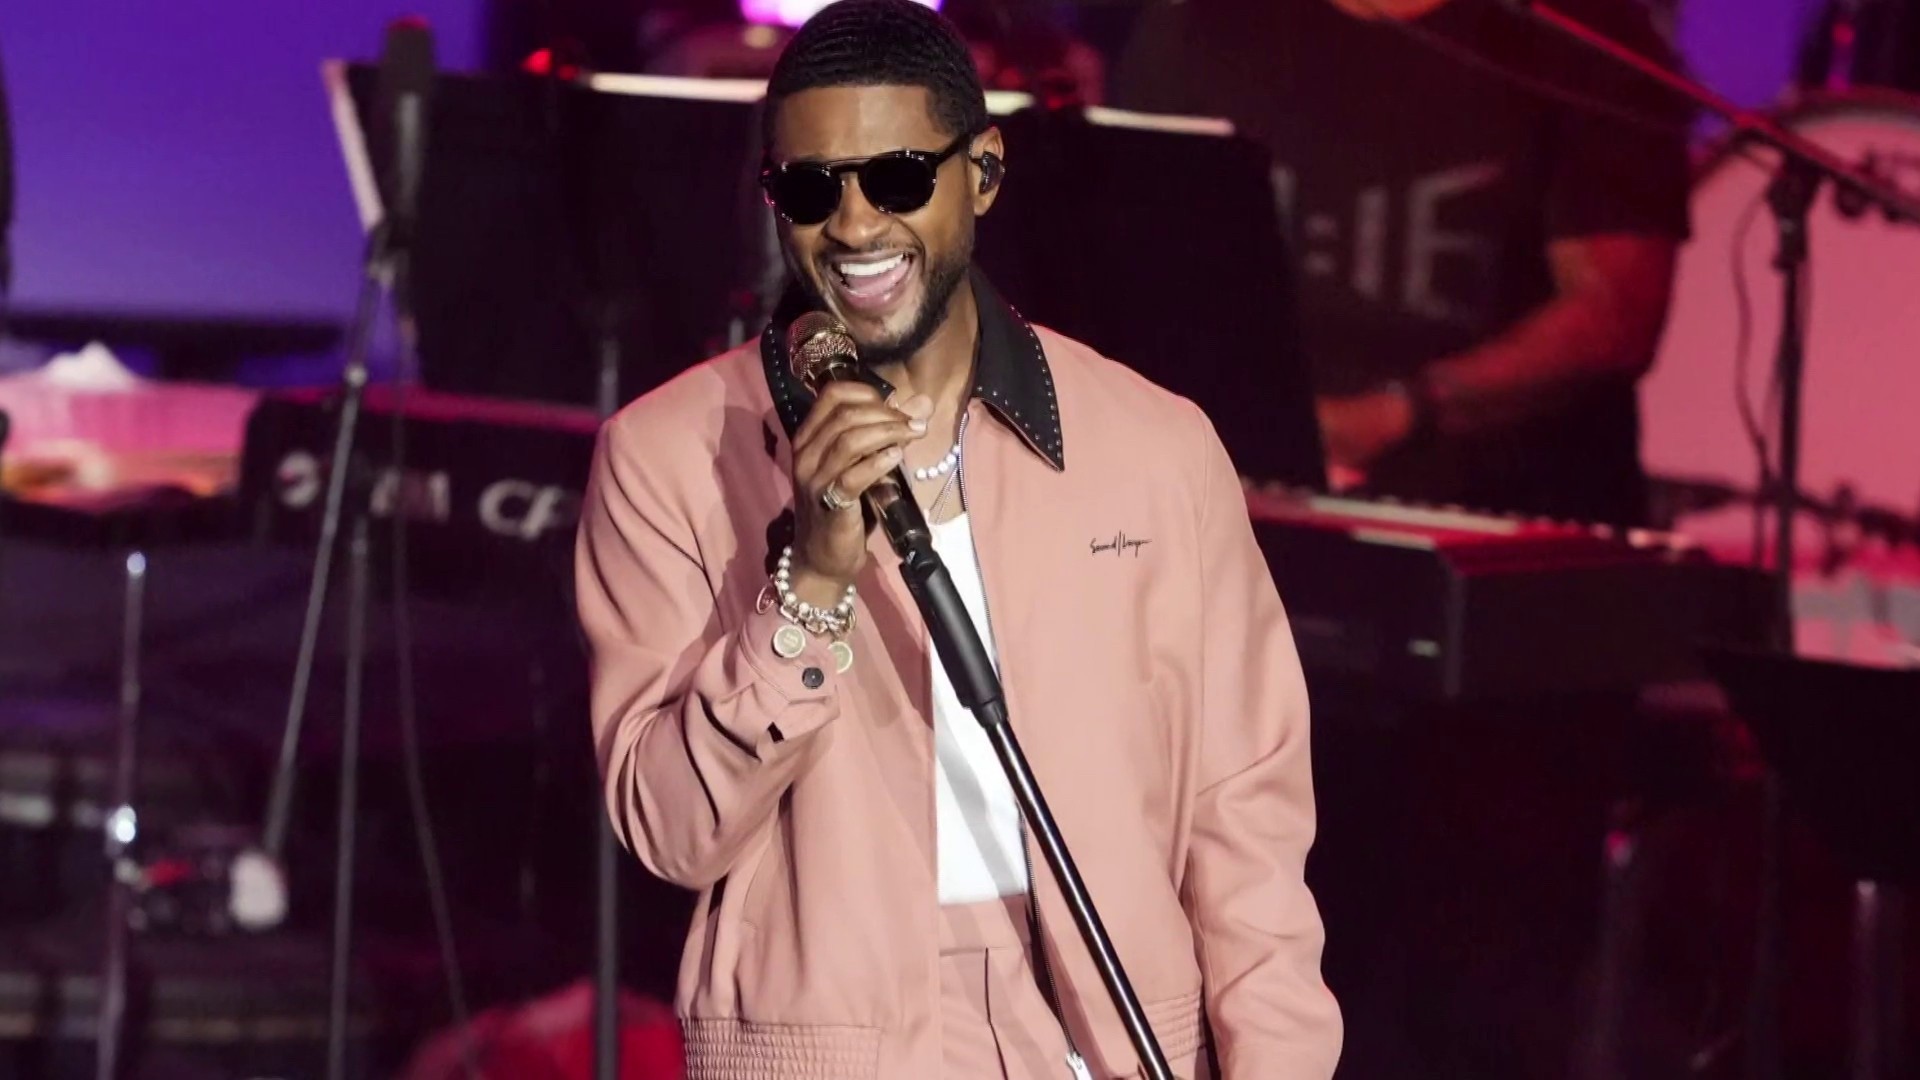 Apple Music releases trailer for Usher's Super Bowl halftime show